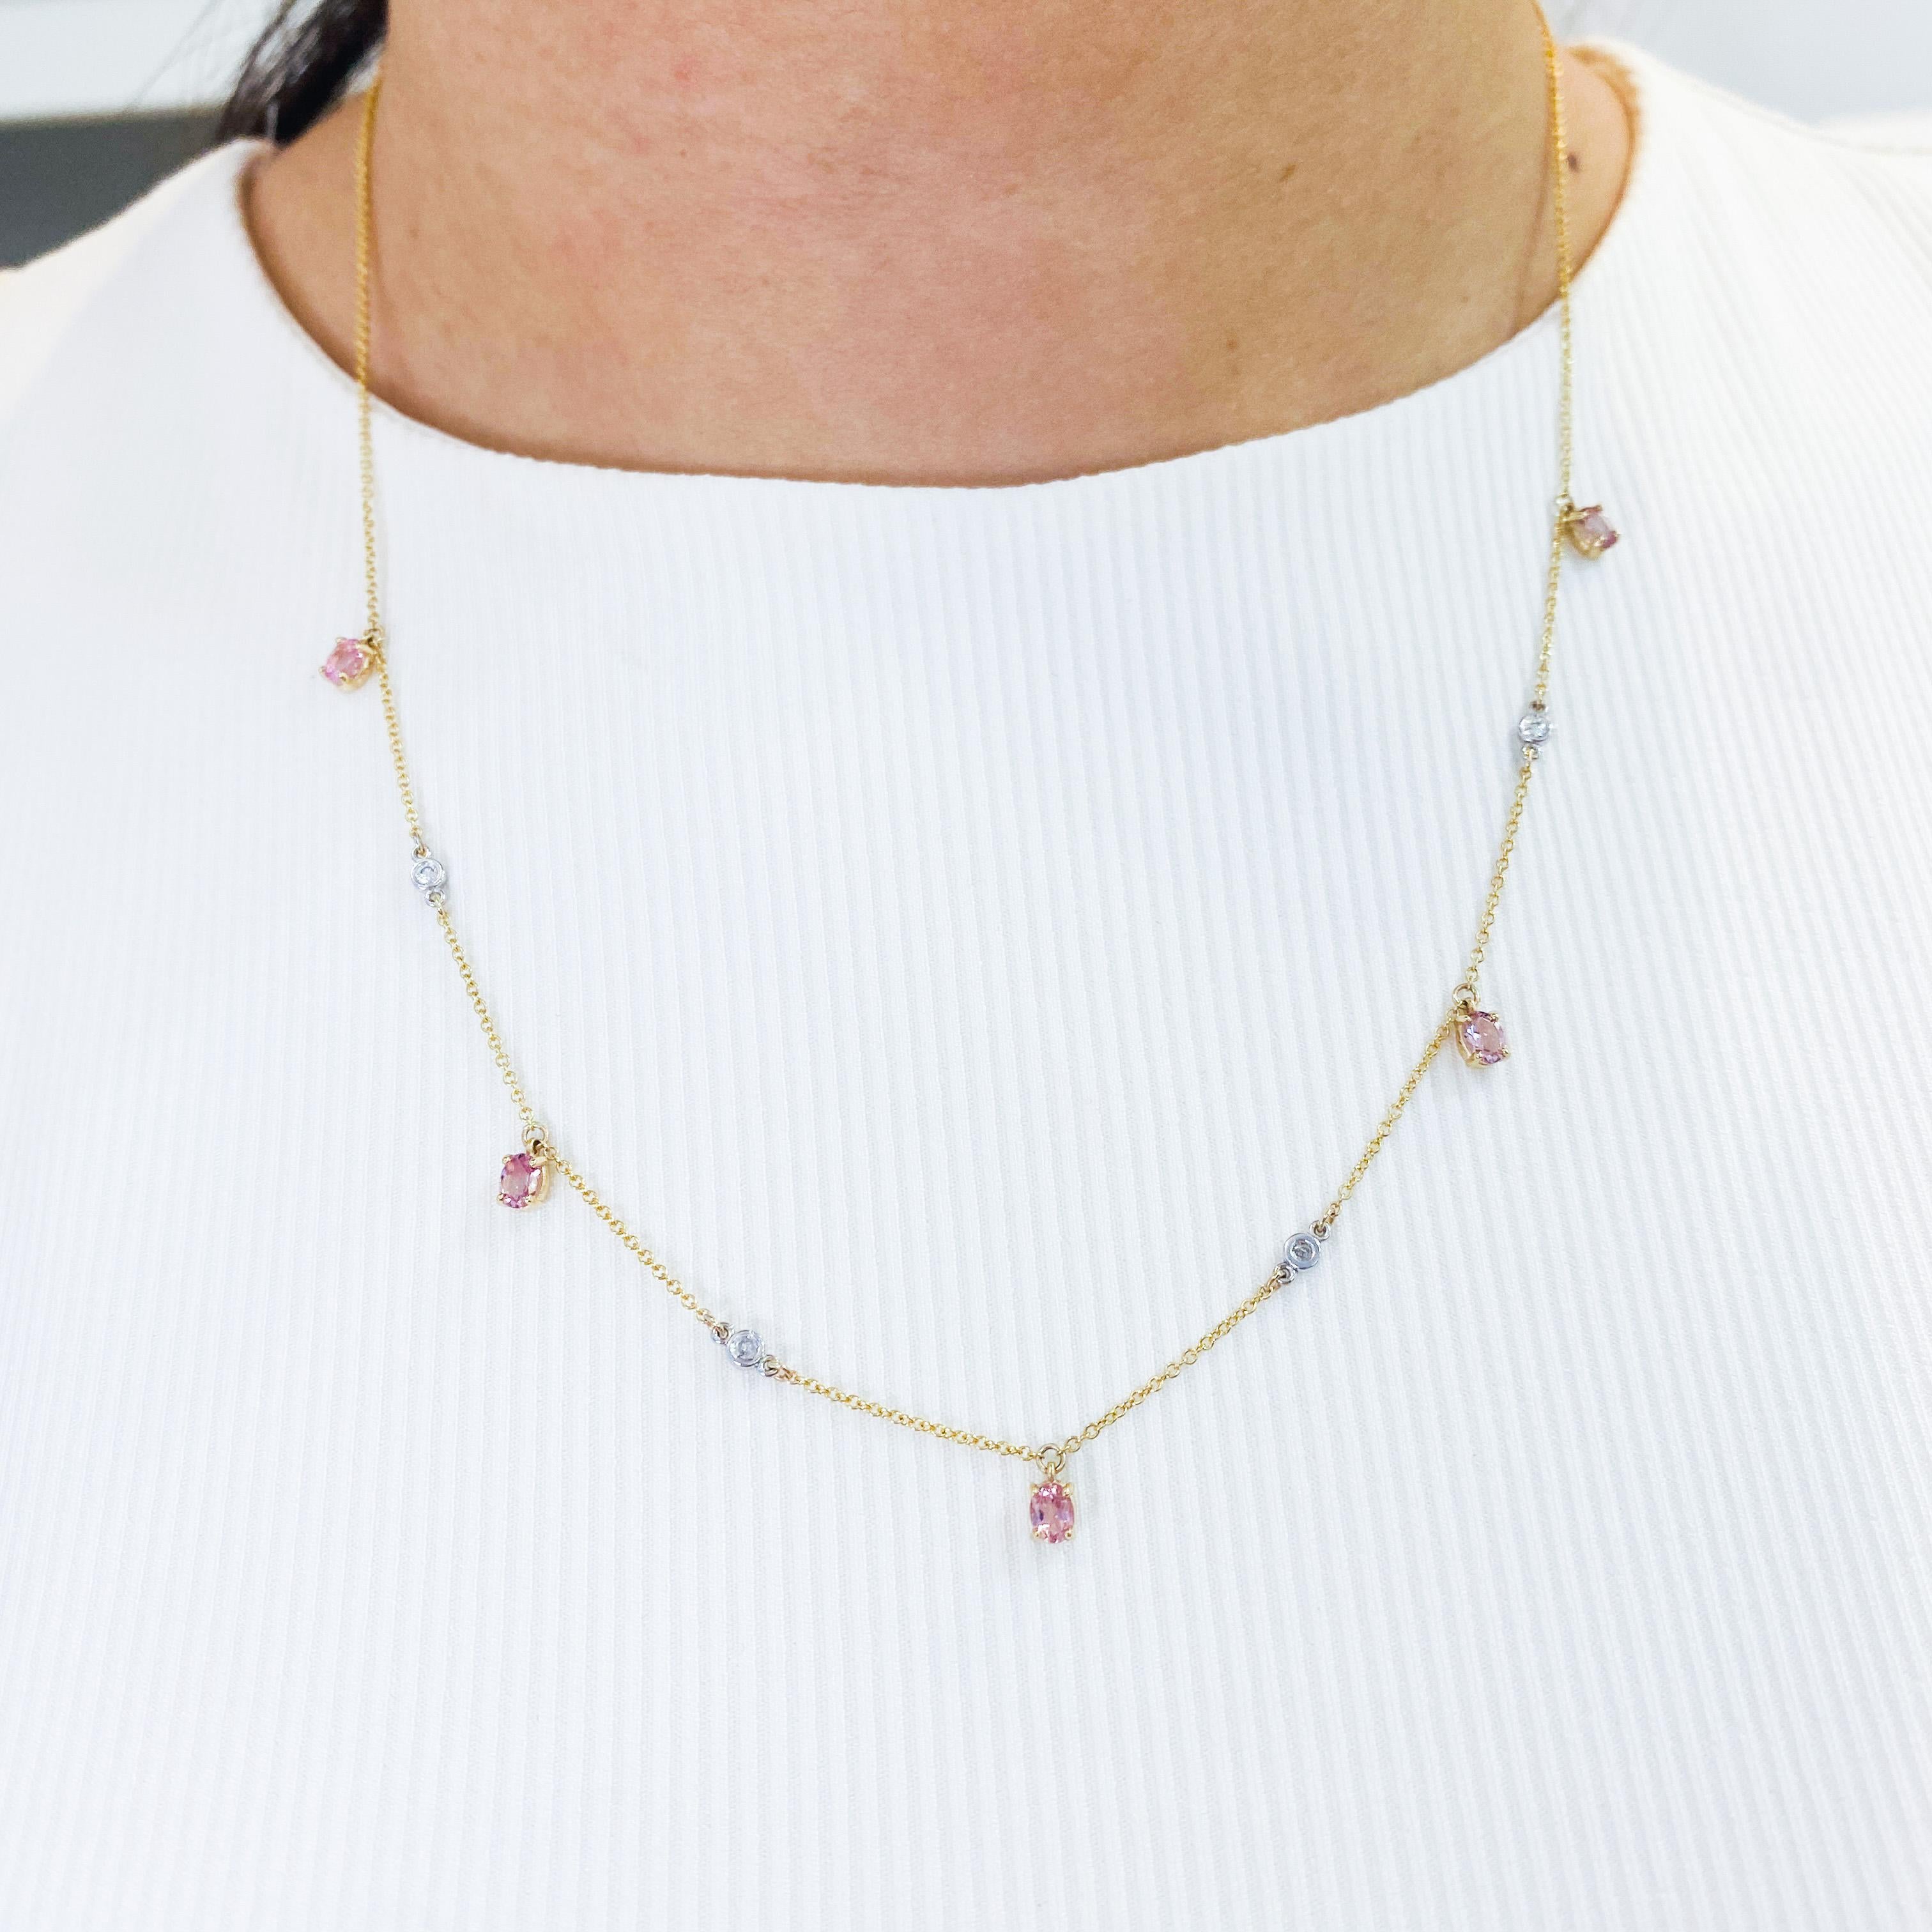 Add a touch of dainty elegance to your jewelry collection with this delightful pink tourmaline and diamond necklace! Tourmaline is one of October's birthstones! Celebrate an October loved one with this perfect gift to mark a graduation, anniversary,